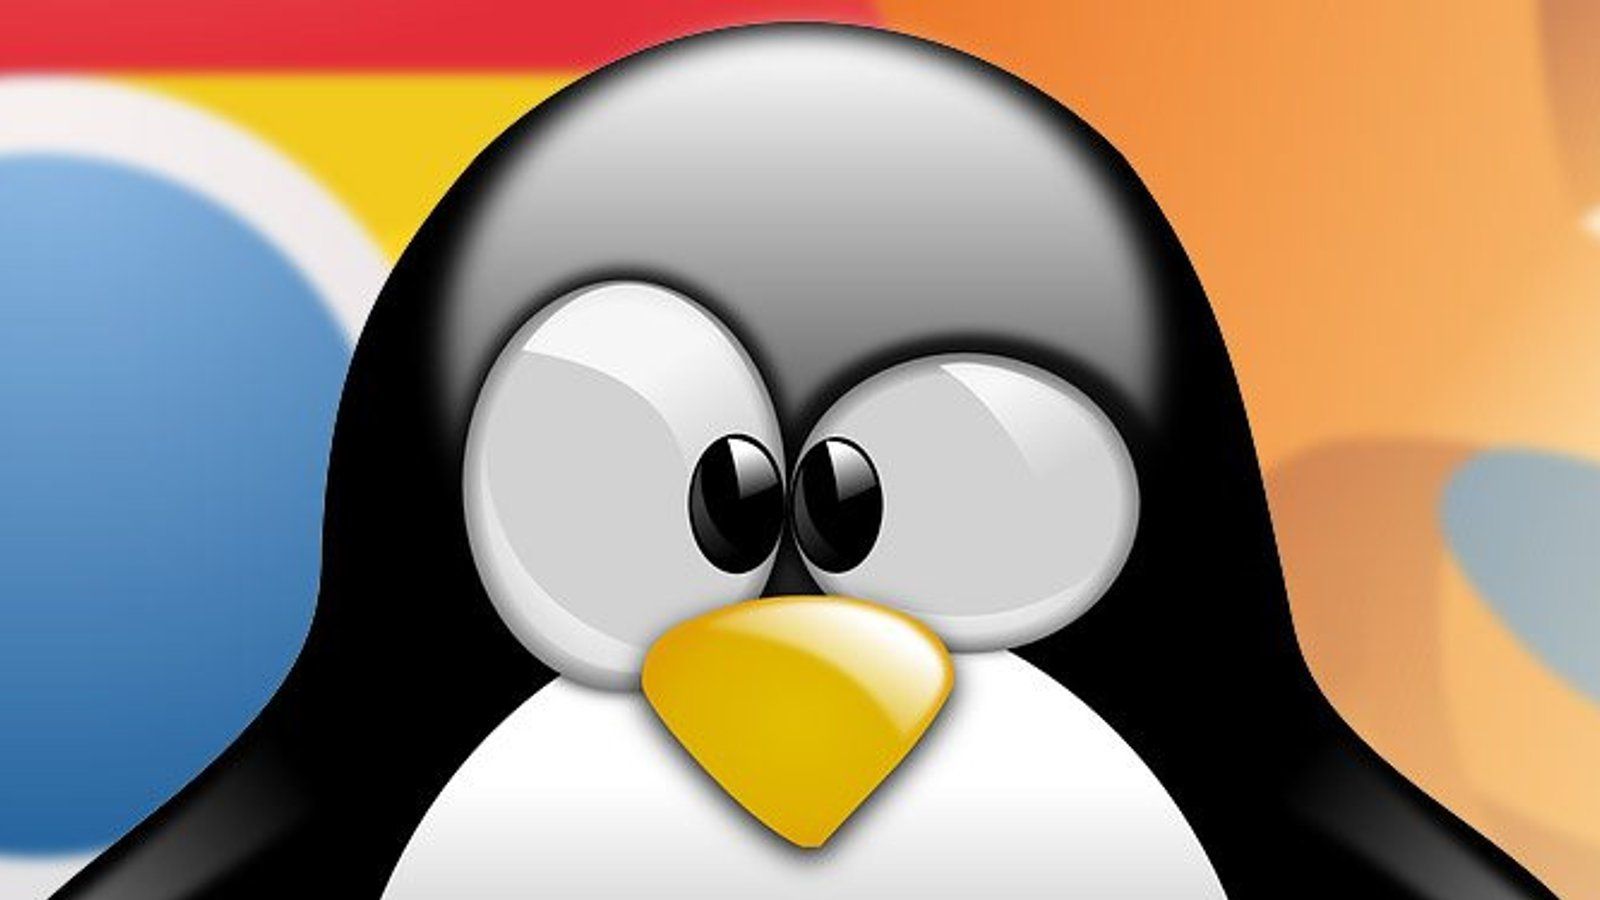 Linux Web Browsers